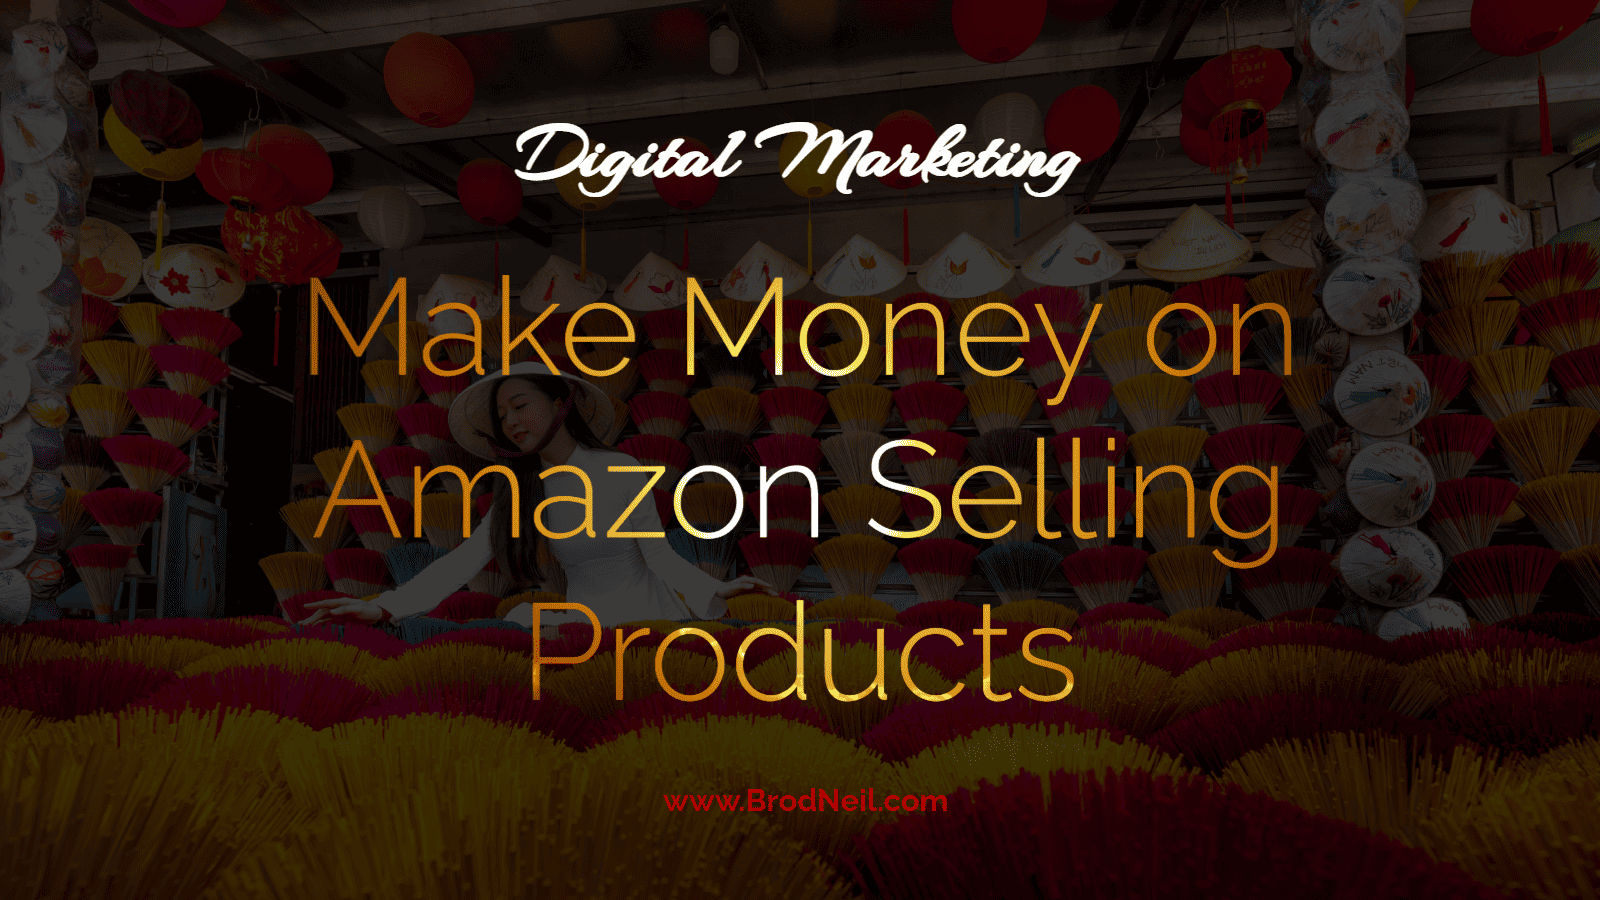 image on how to make money on amazon selling products